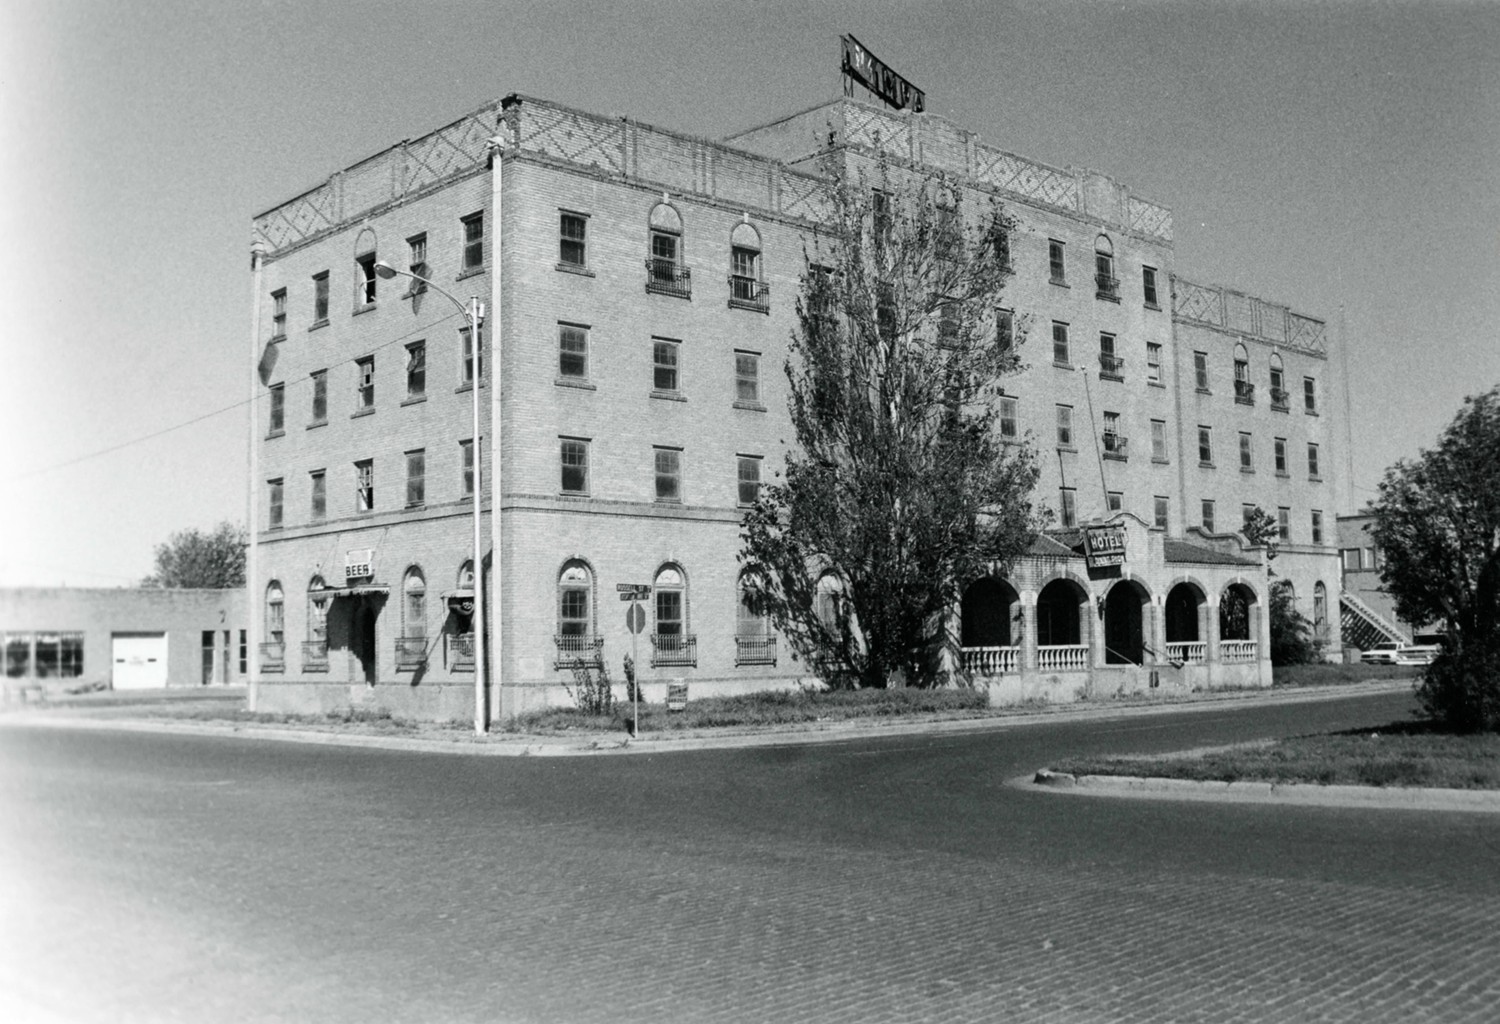 Schneider Hotel - Pampa Hotel, Pampa Texas South and east facades (1985)